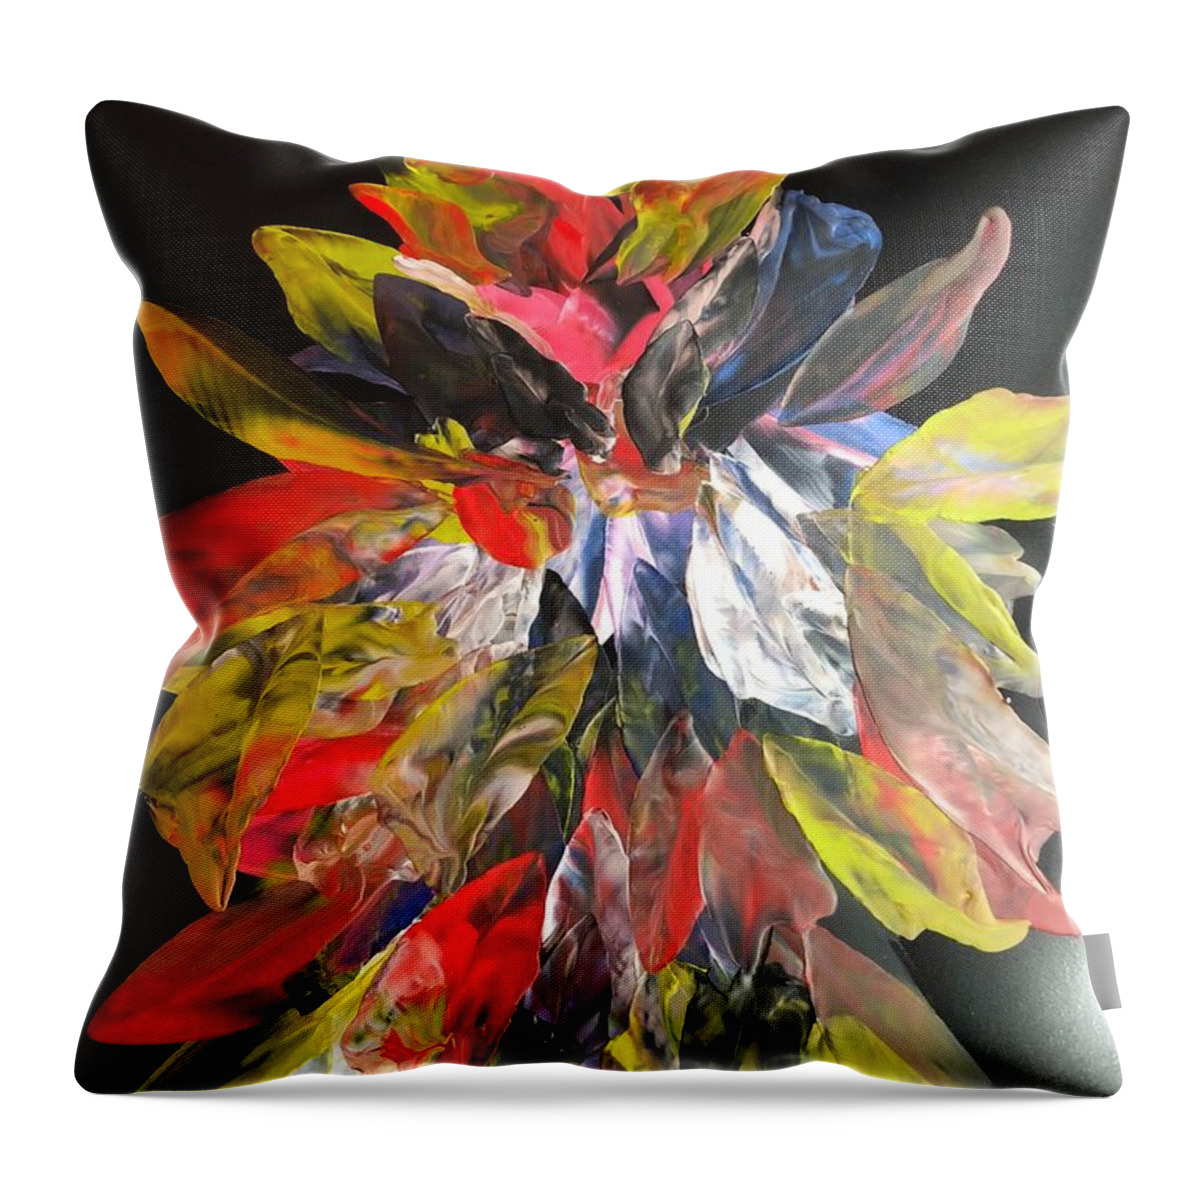  Throw Pillow featuring the painting Garden Plant by Tommy McDonell